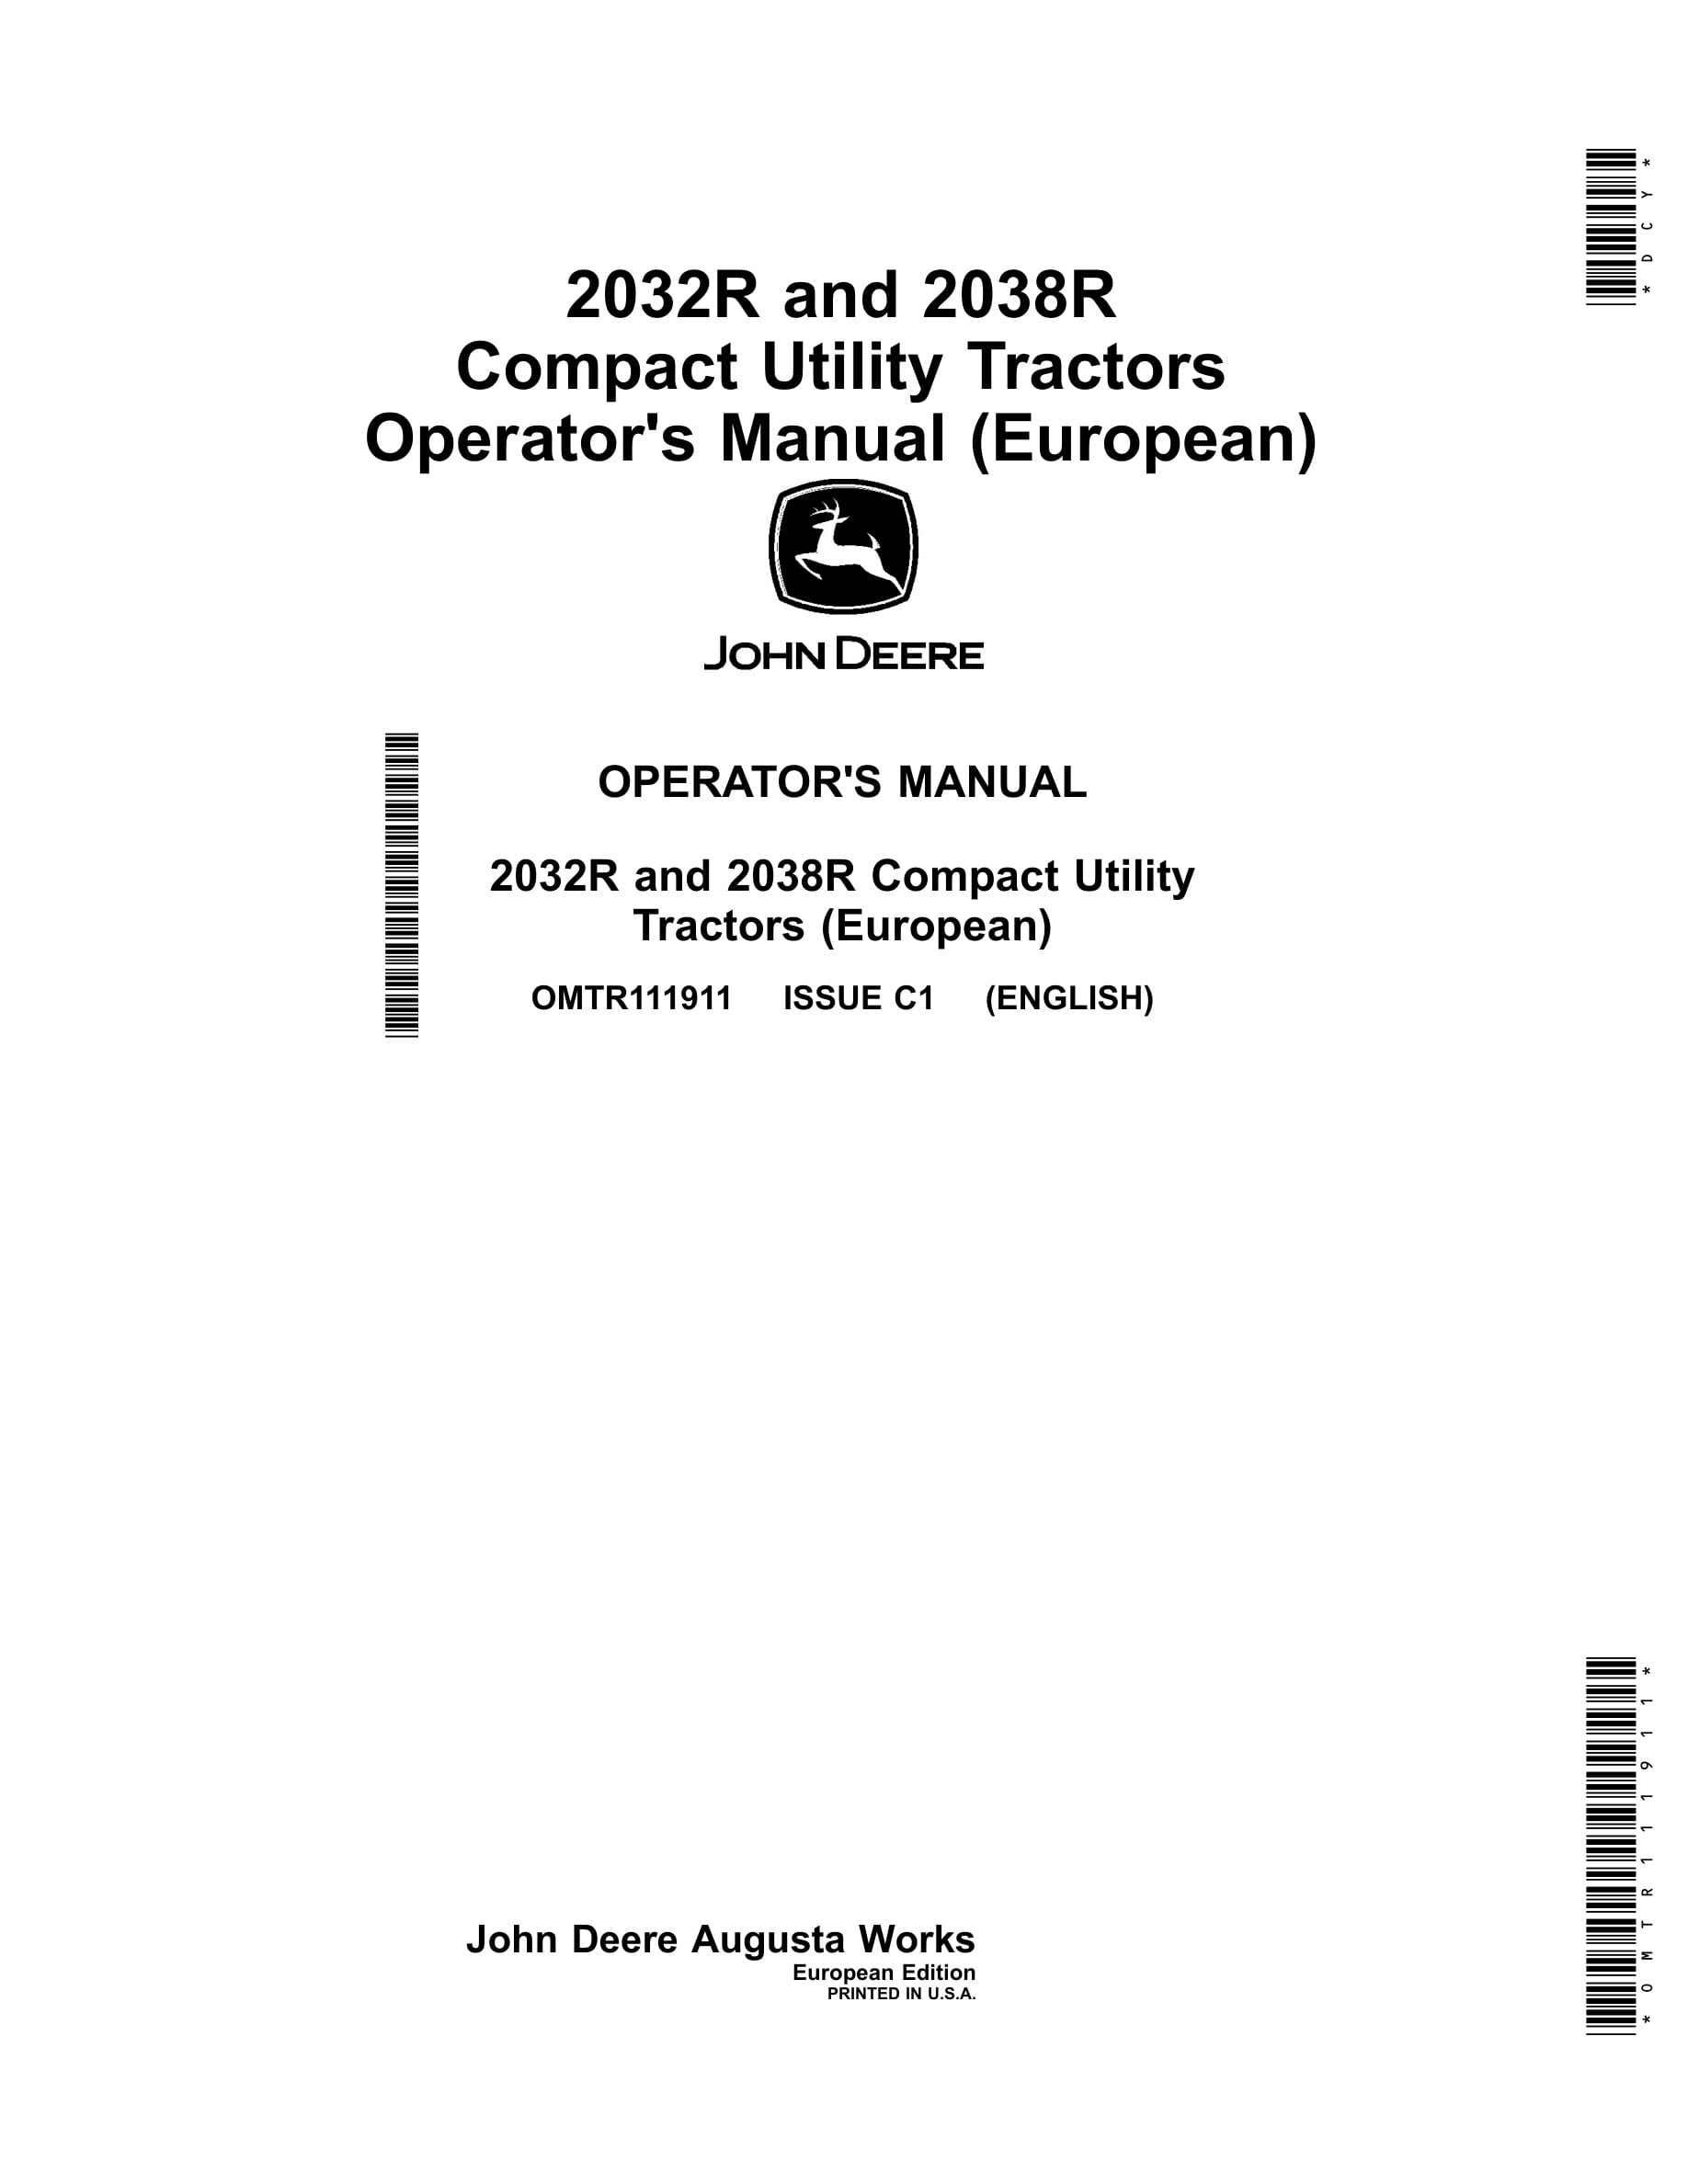 John Deere 2032r And 2038r Compact Utility Tractors Operator Manuals OMTR111911-1